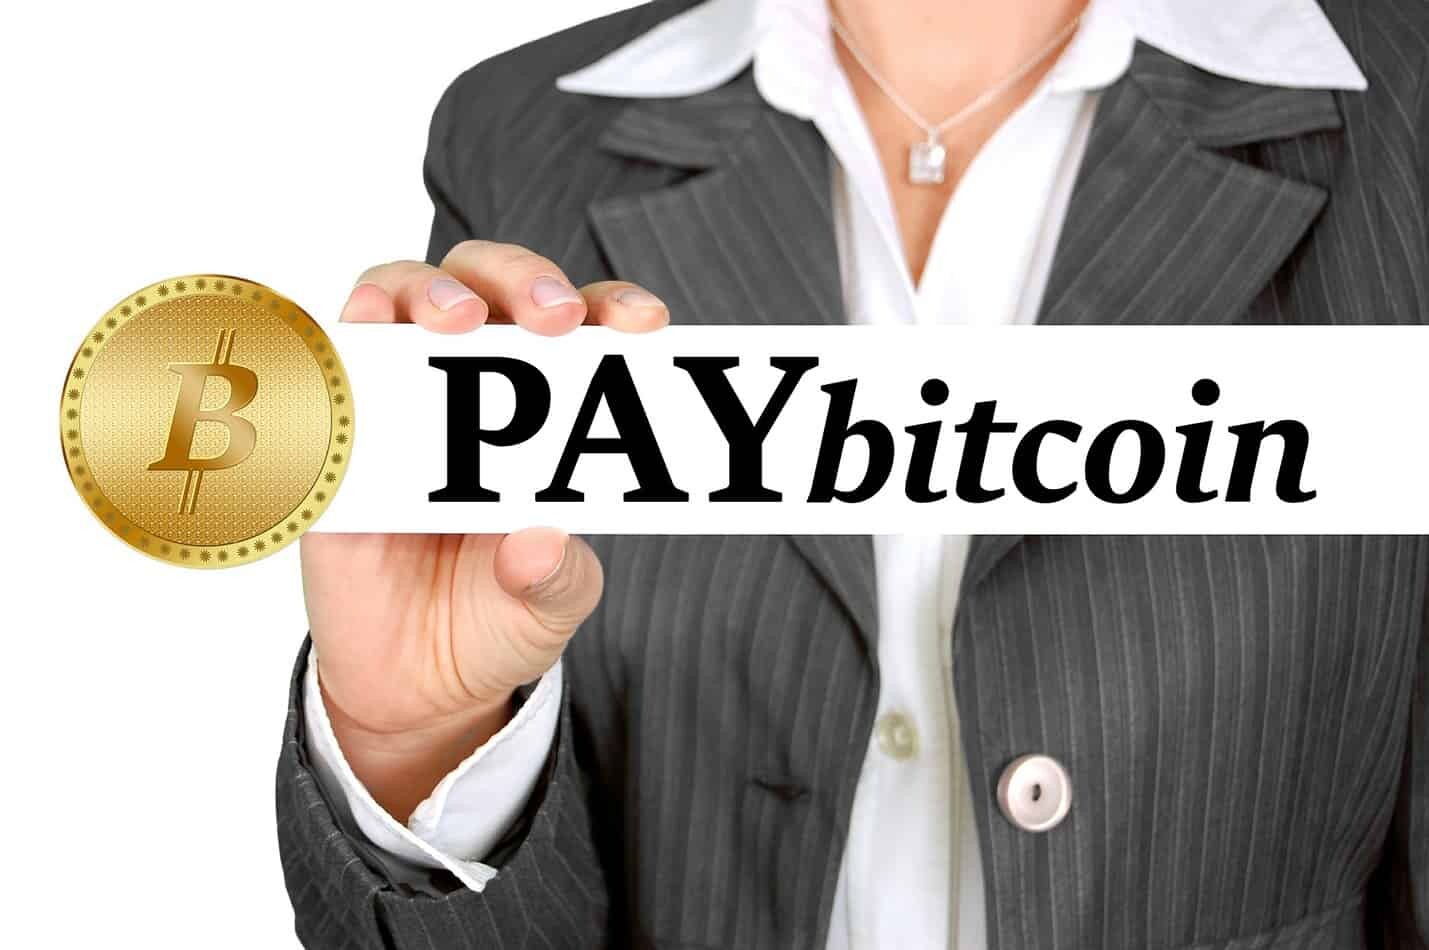 Easy Payments Using Bitcoins